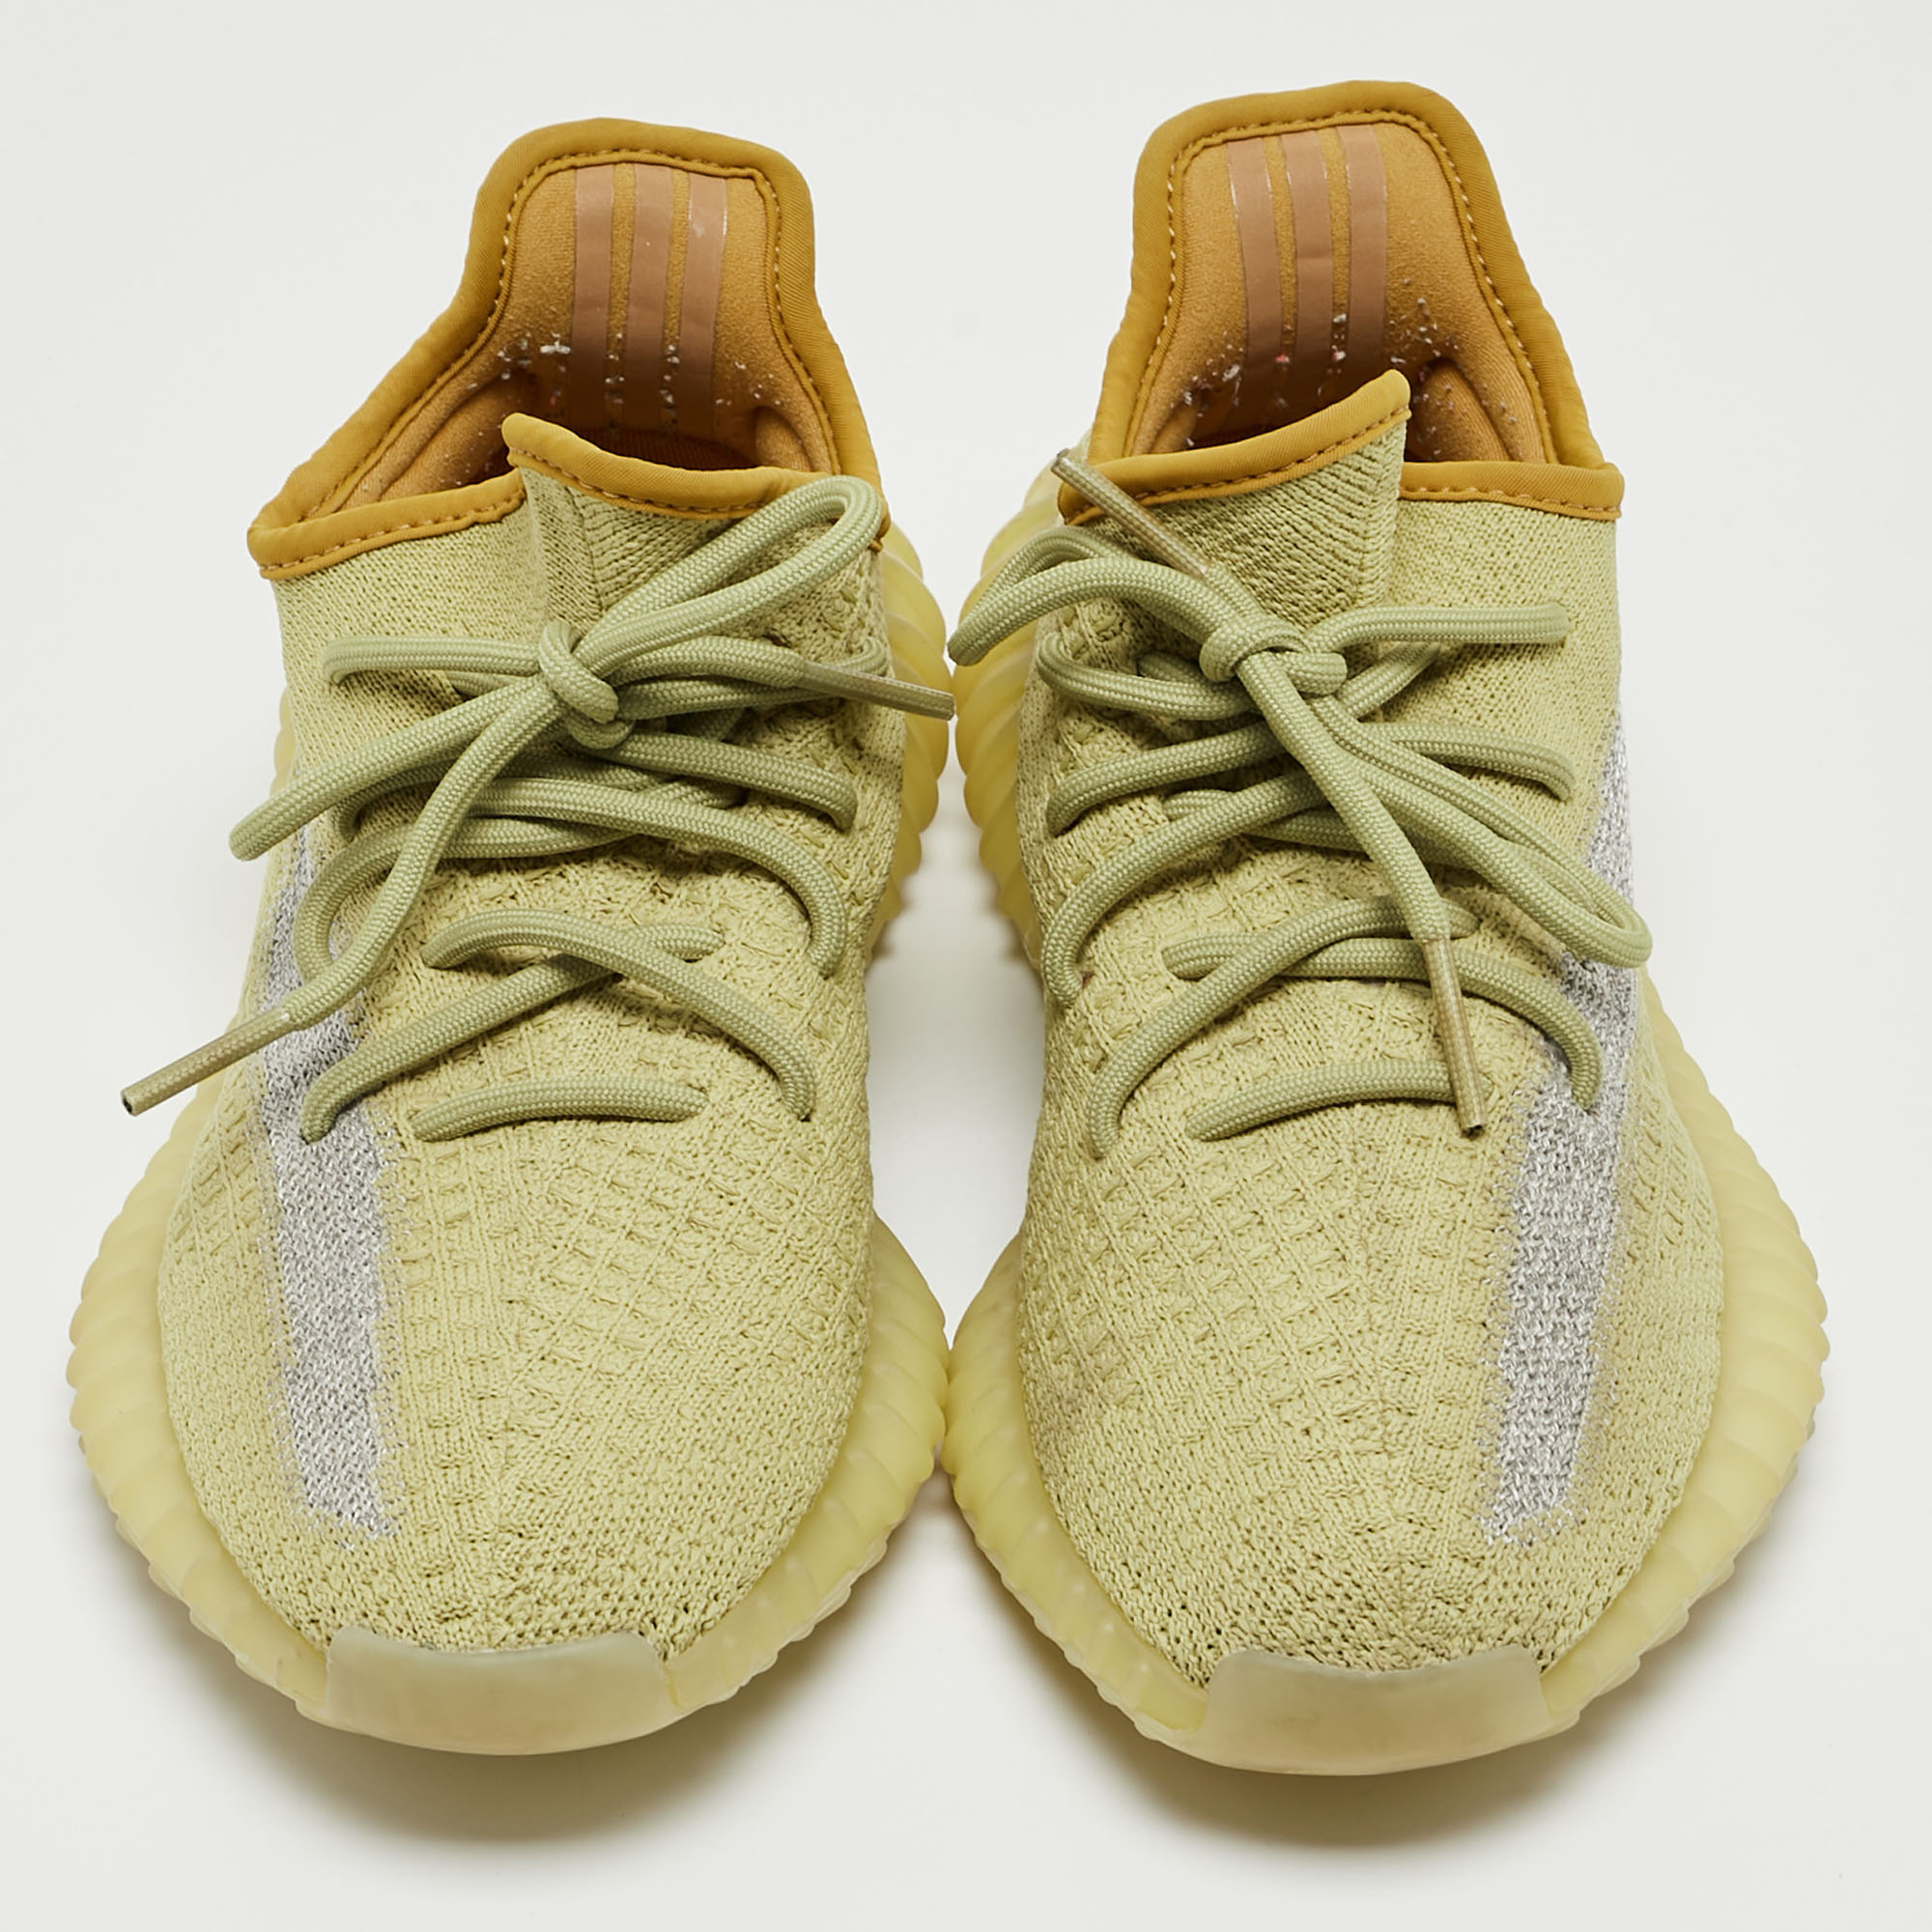 Yeezy X Adidas Yellow Knit Fabric Boost 350 V2 Marsh Sneakers Size 38